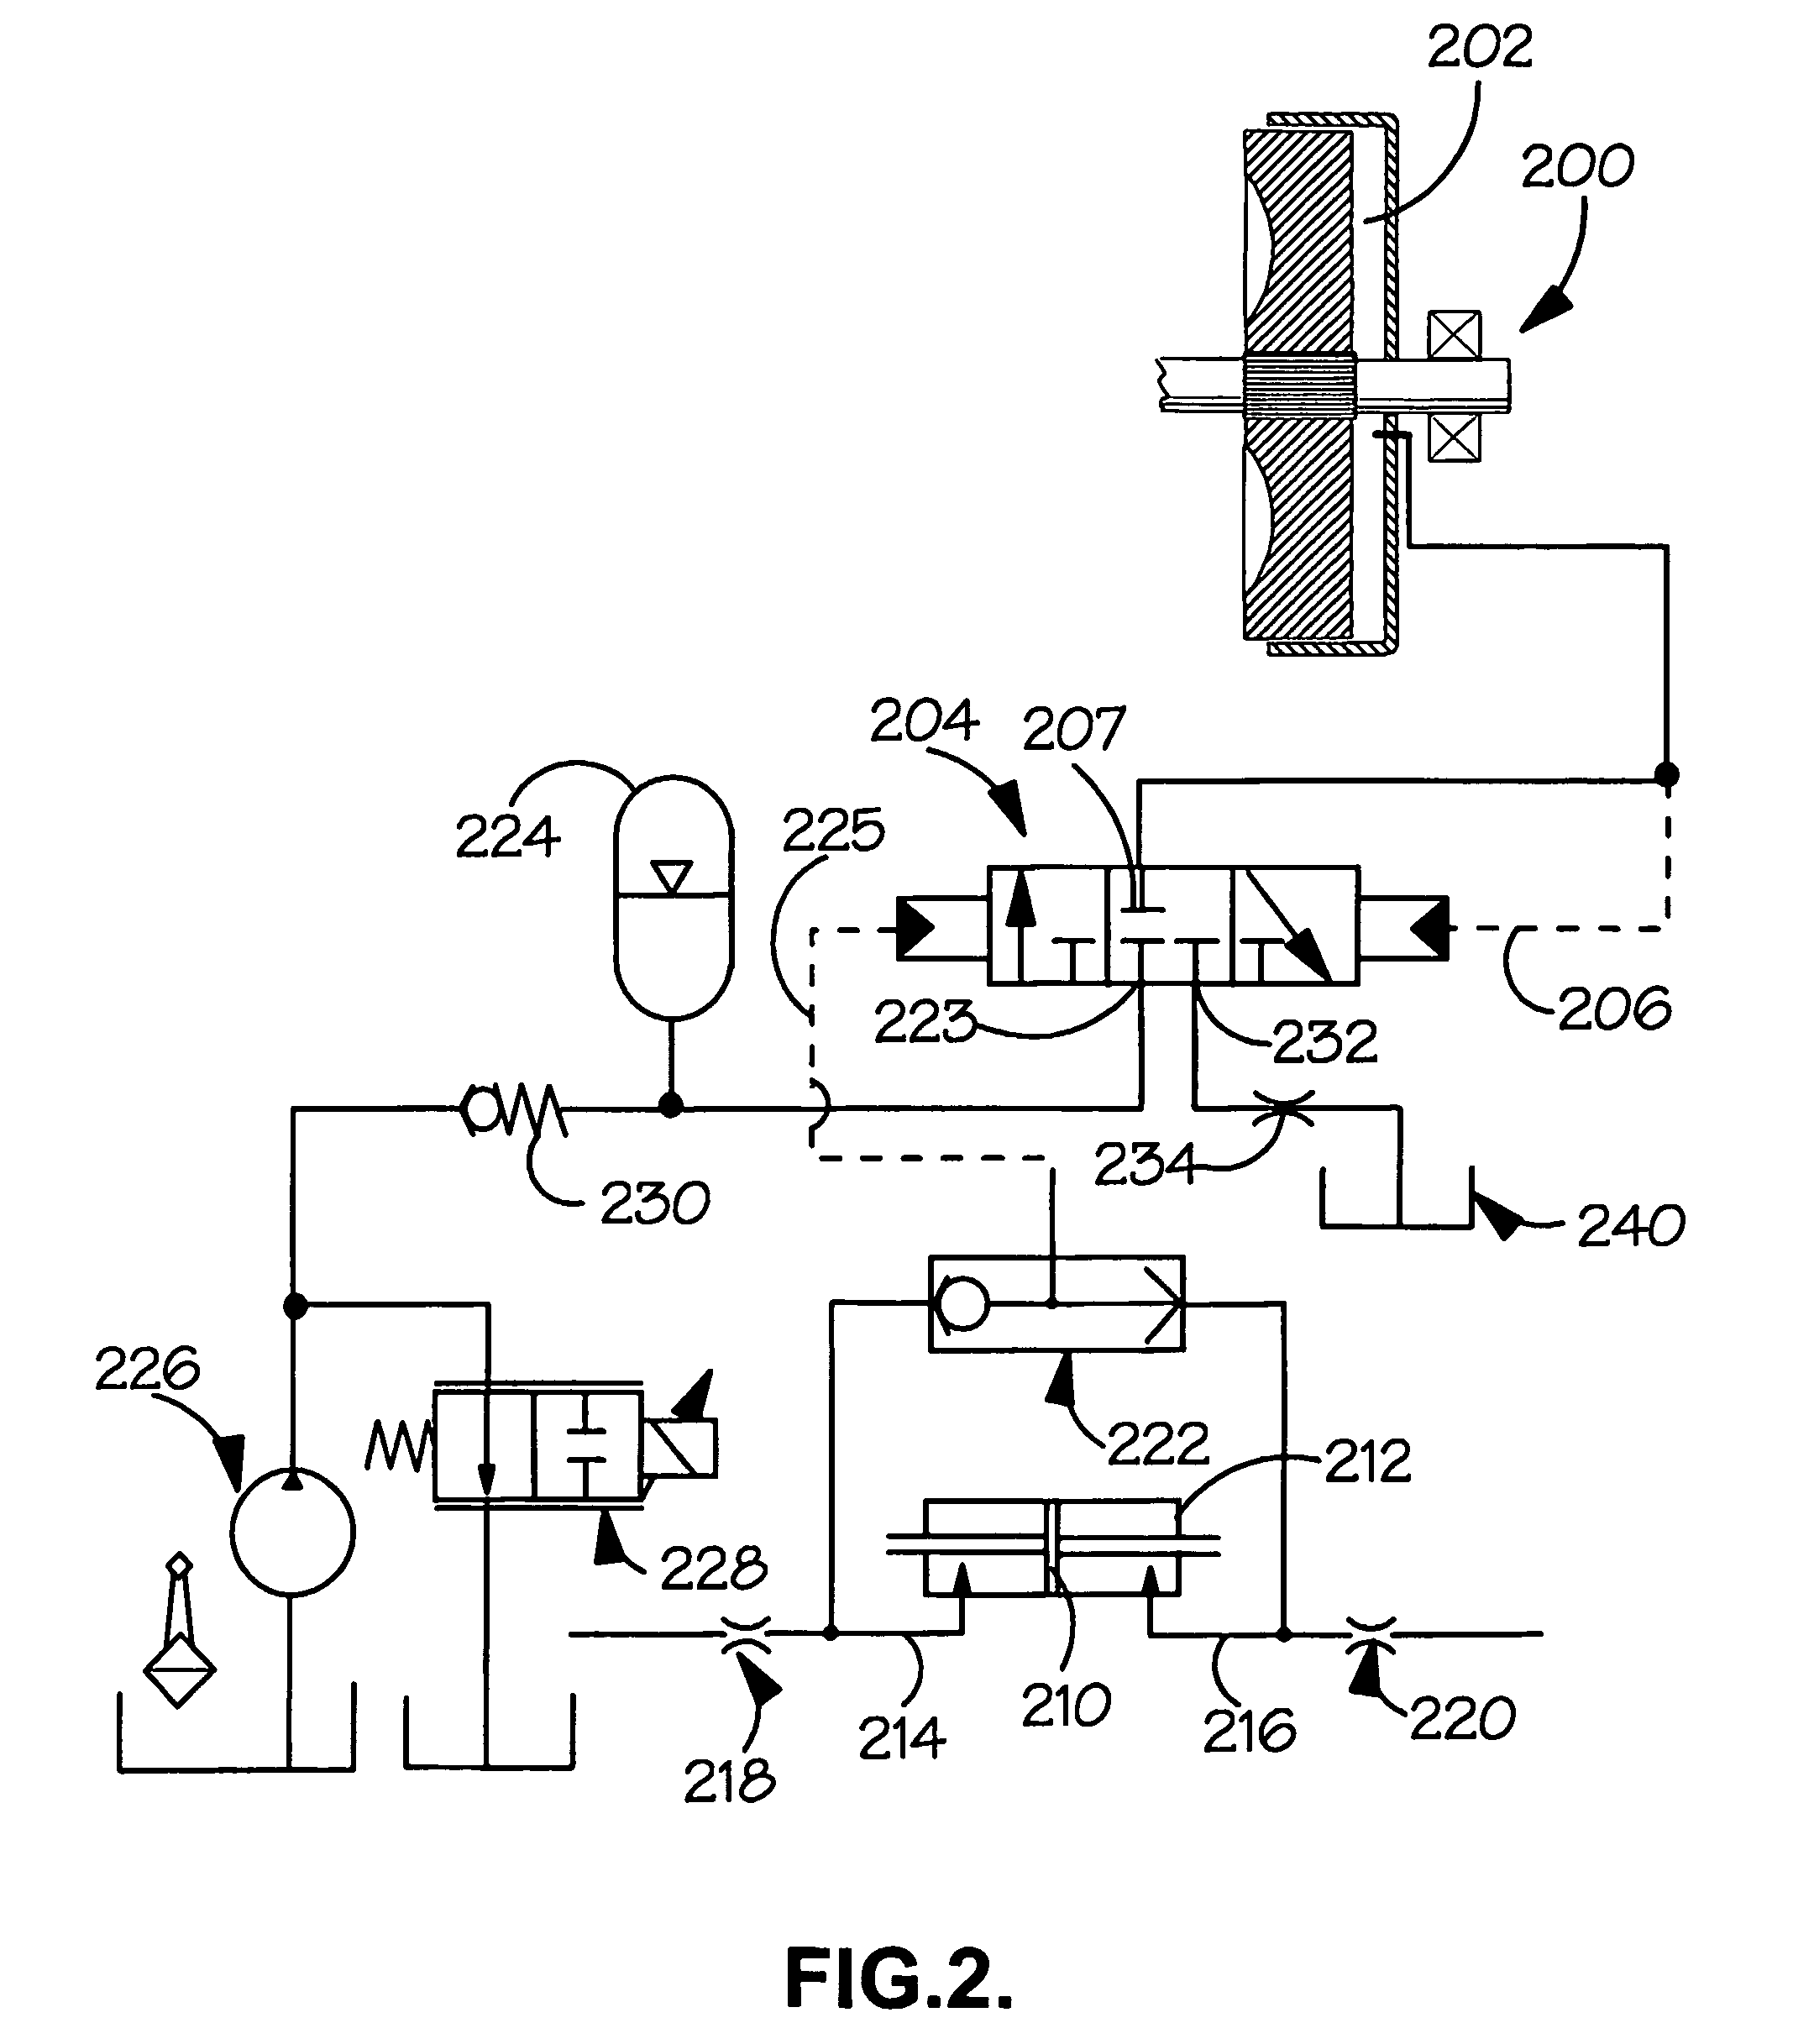 Hydraulic control circuit for a variator